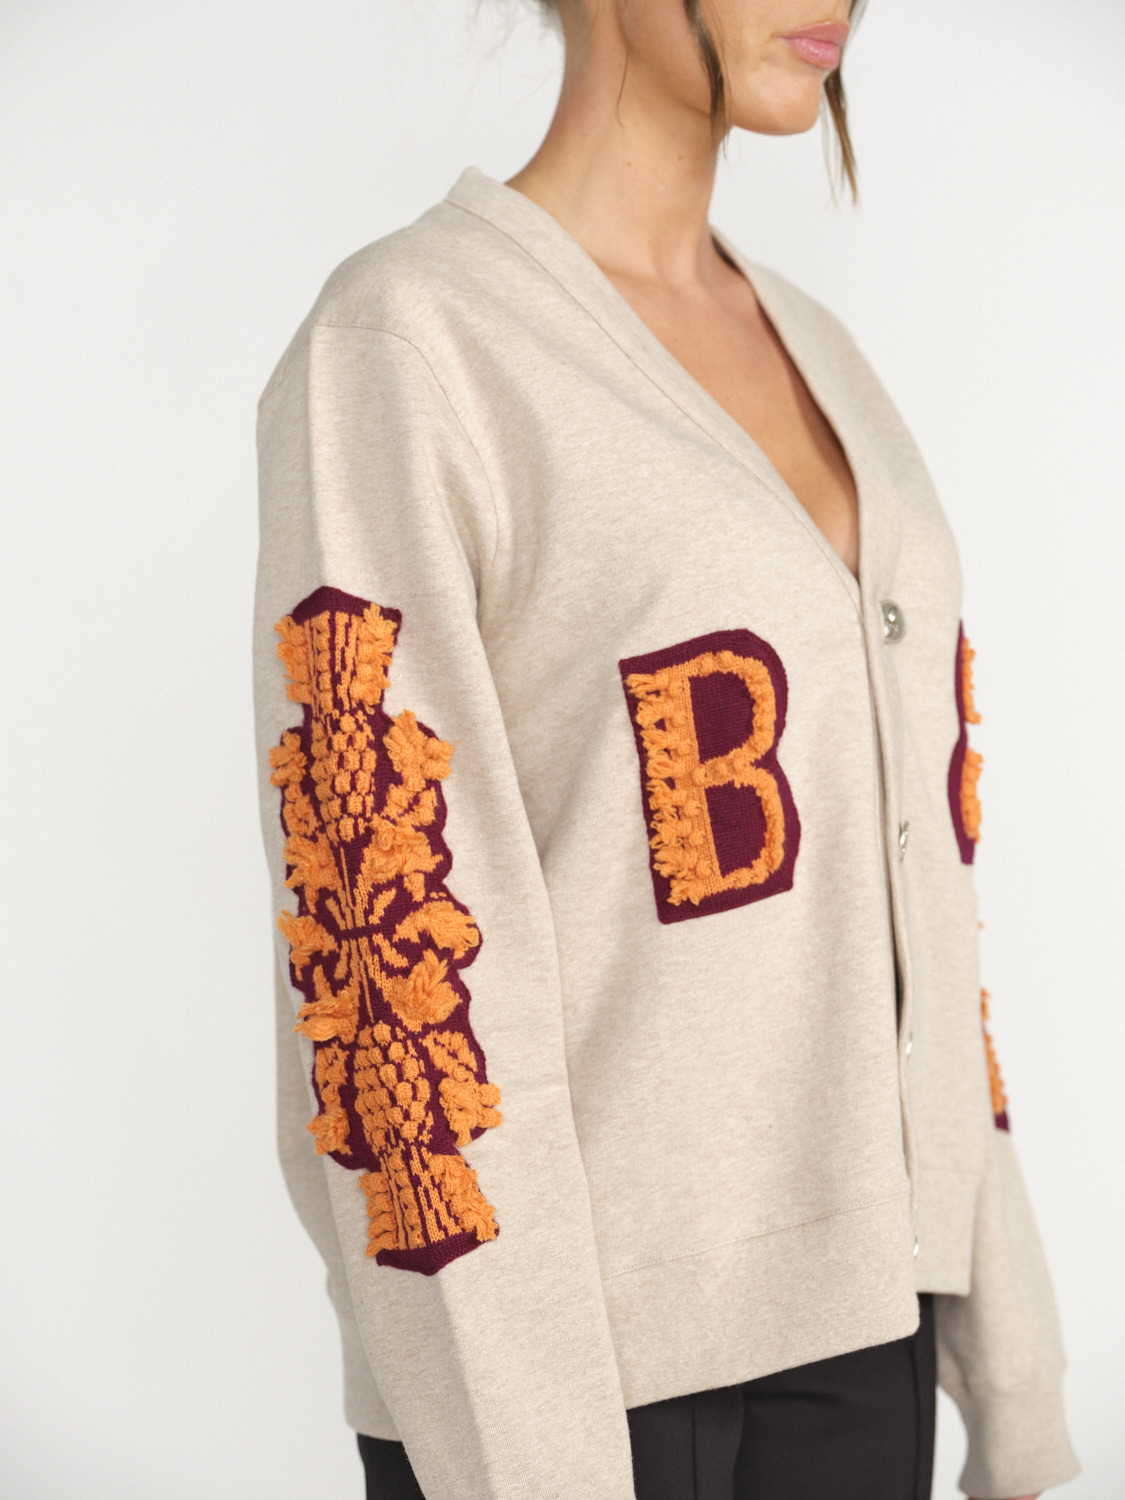 Barrie Barrie - Thistle Logo Cardigan Beige with orange applications   black S